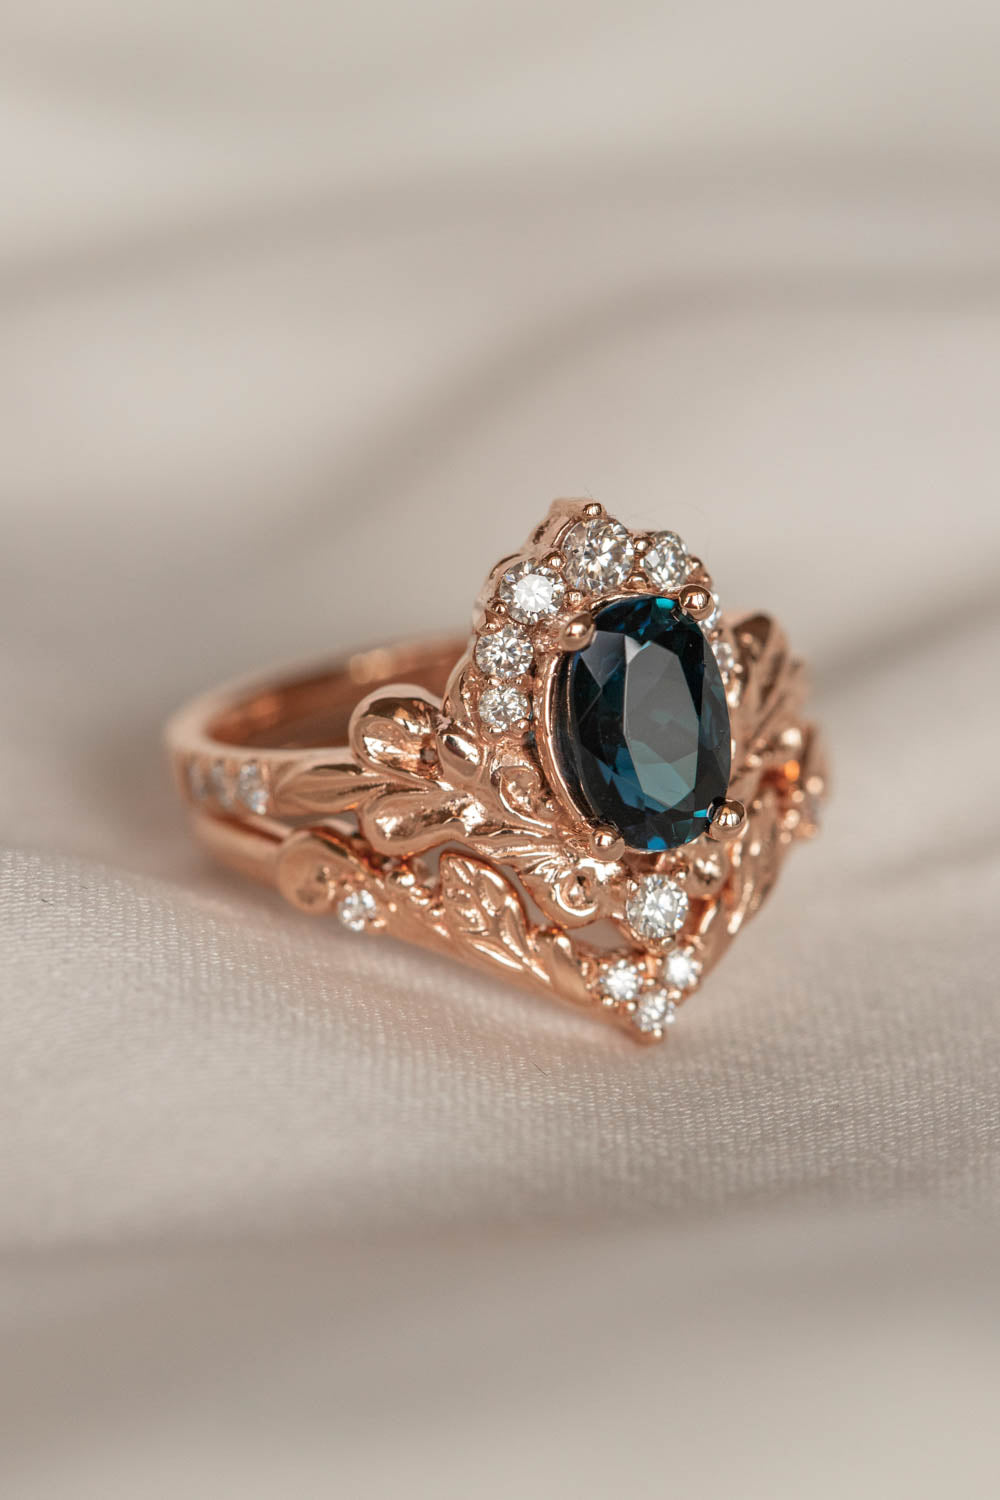 Teal Tourmaline And Diamonds Bridal Ring Set Baroque Inspired